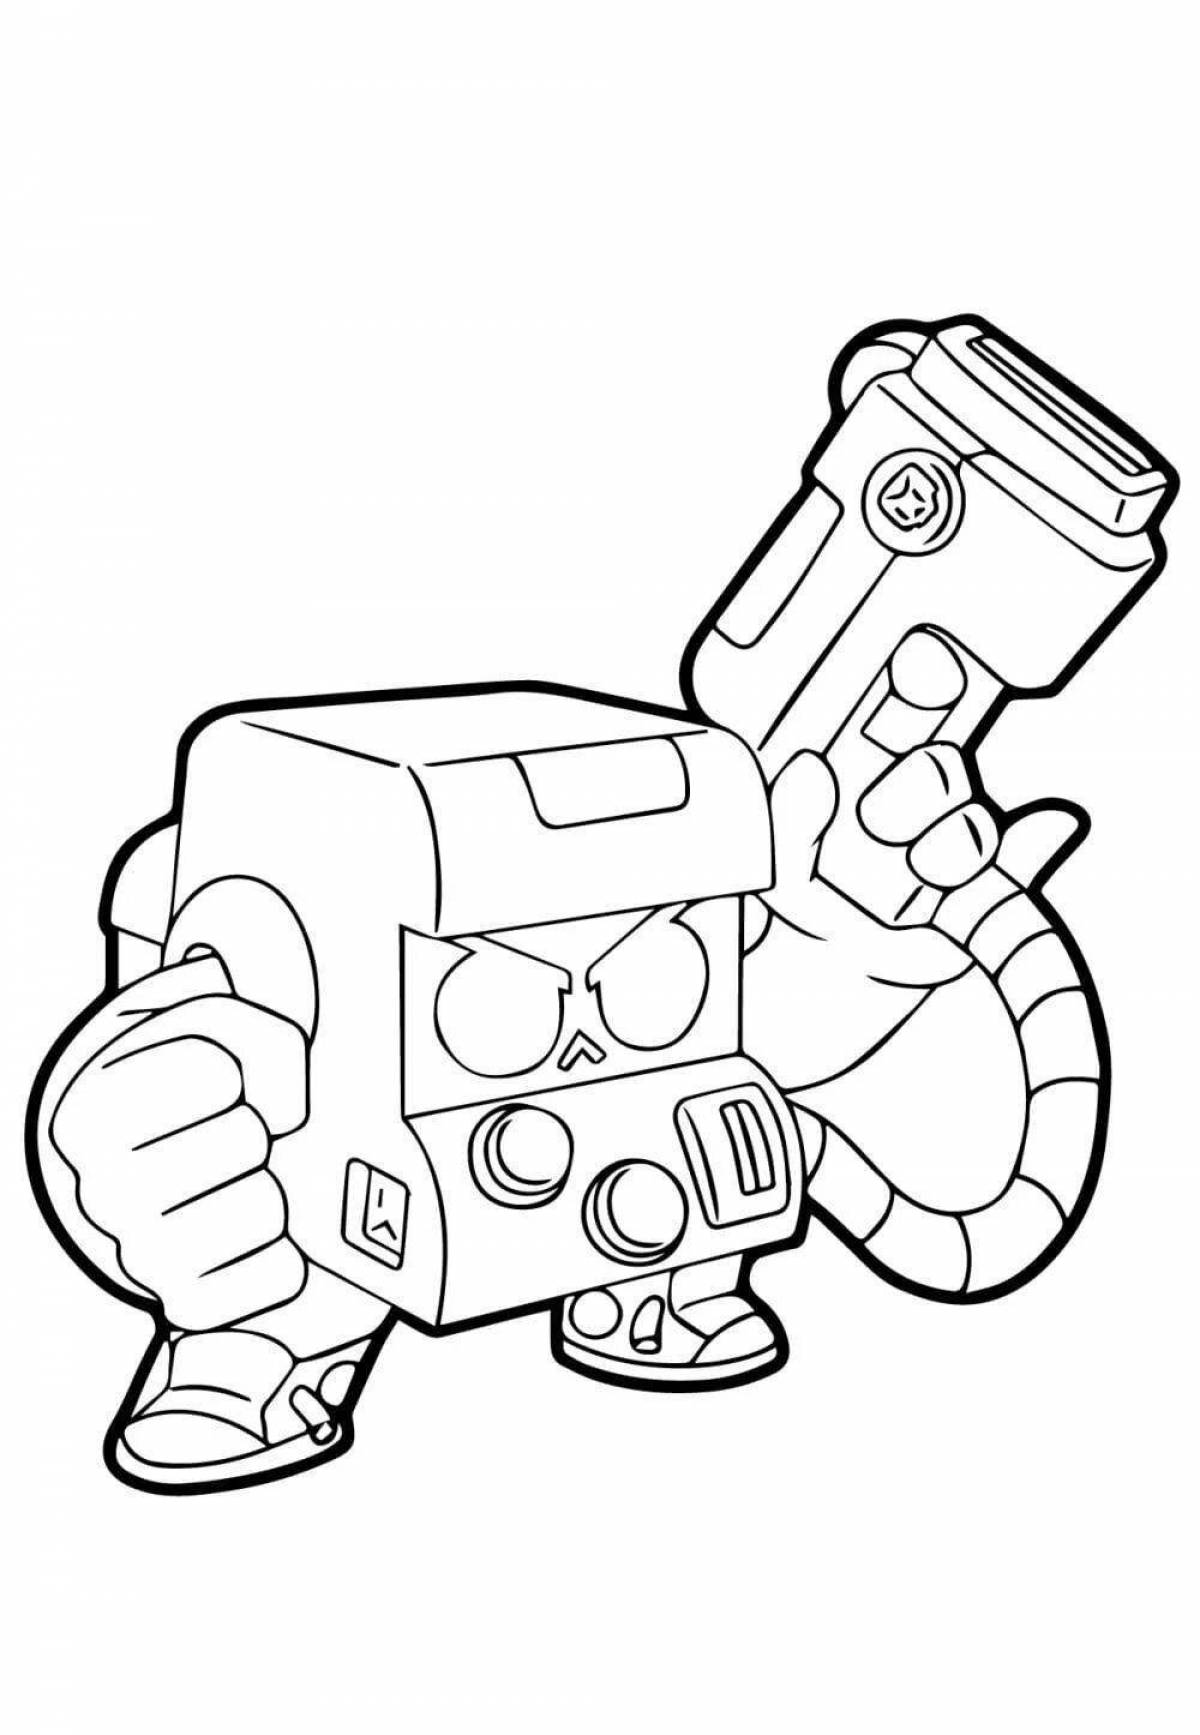 Brawl stars character coloring pages